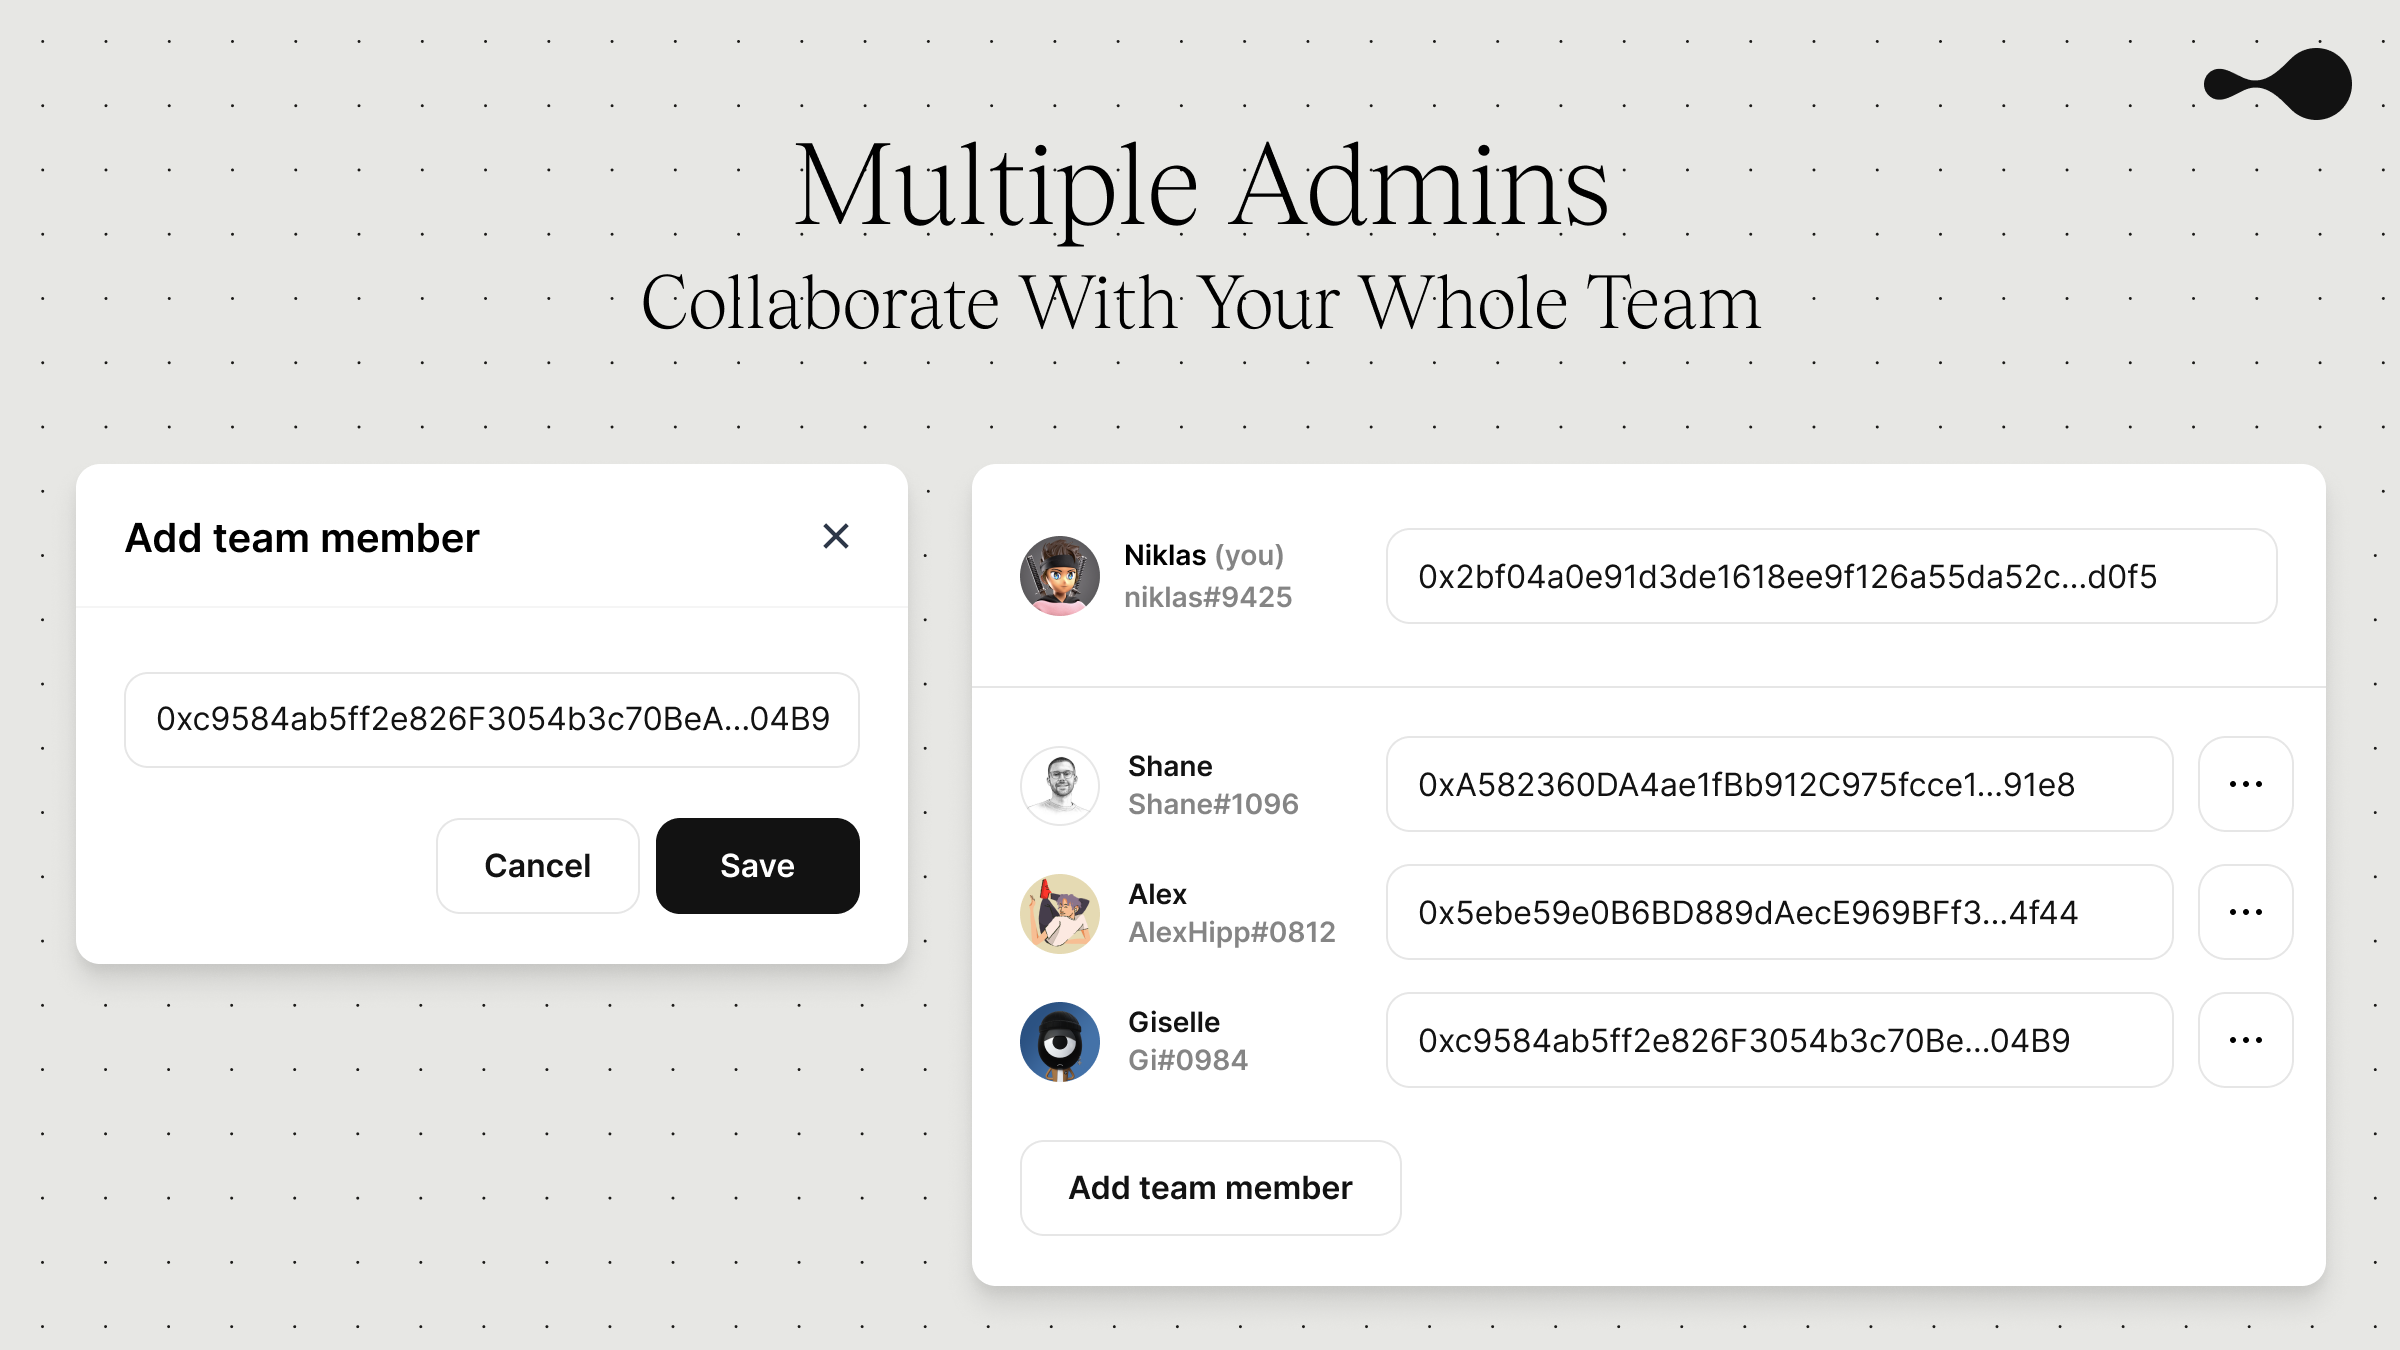 Collaborate with your whole team!